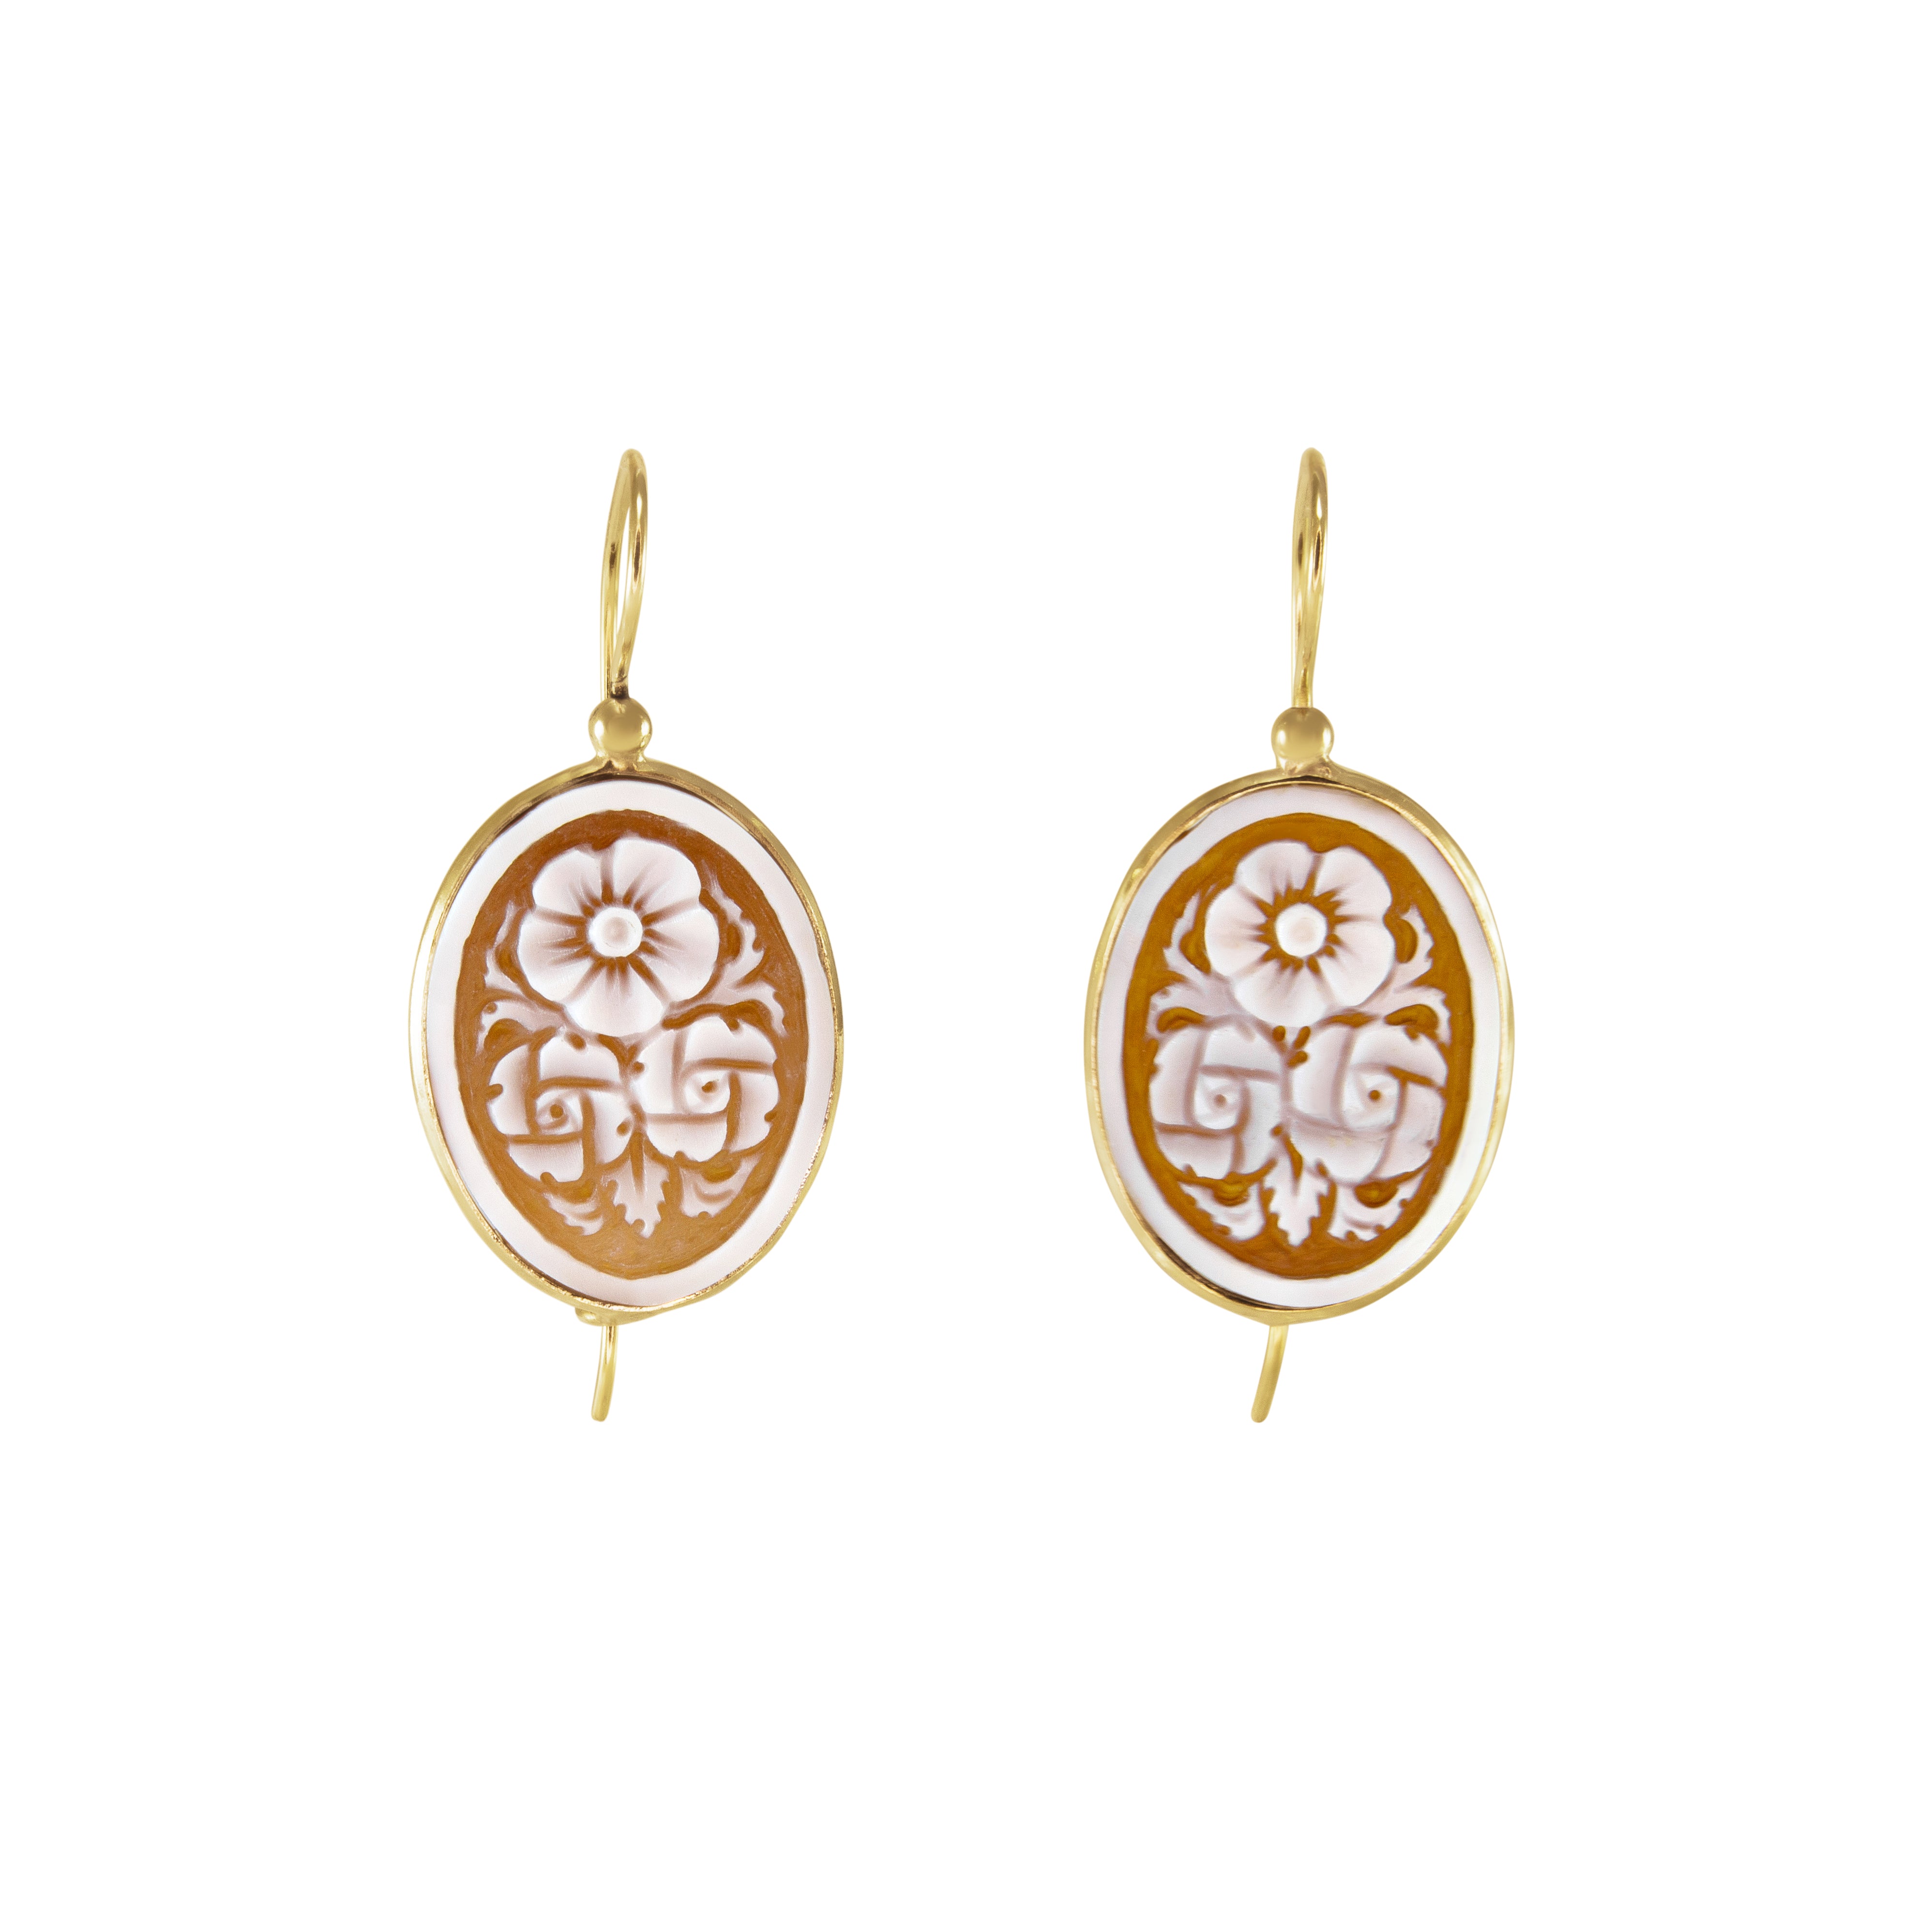 Small Oval Flower Cameo Earrings - Yellow Gold